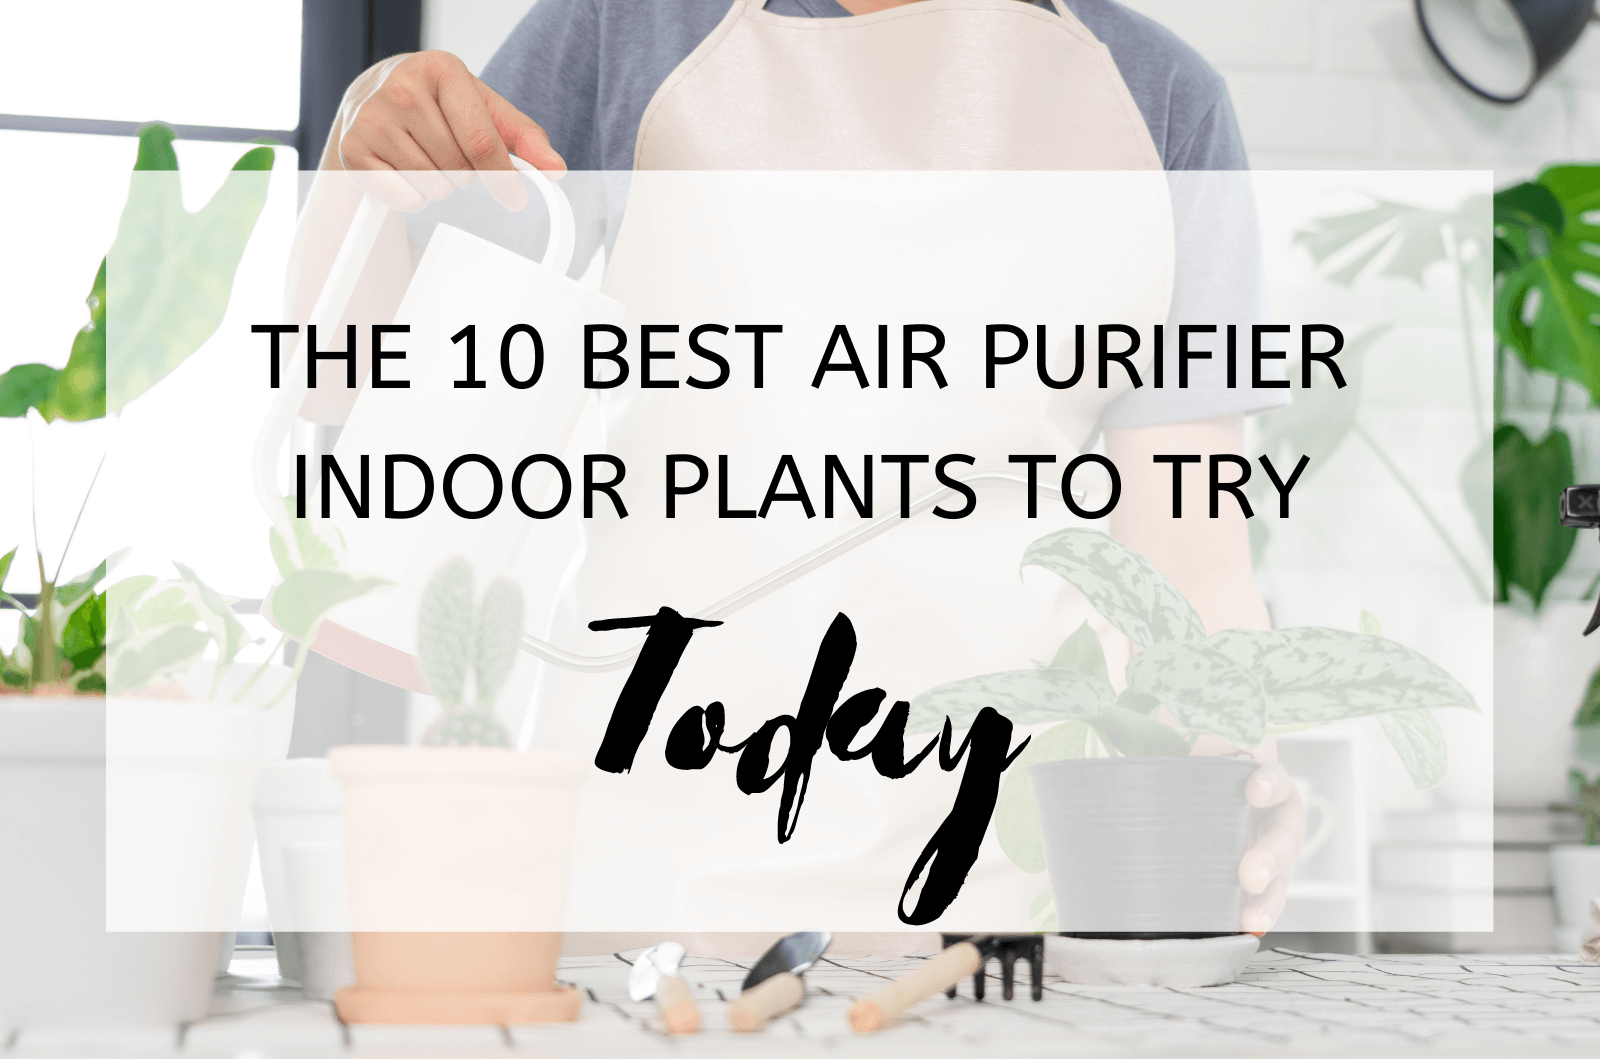 The 10 Best Air Purifier Indoor Plants To Try Today